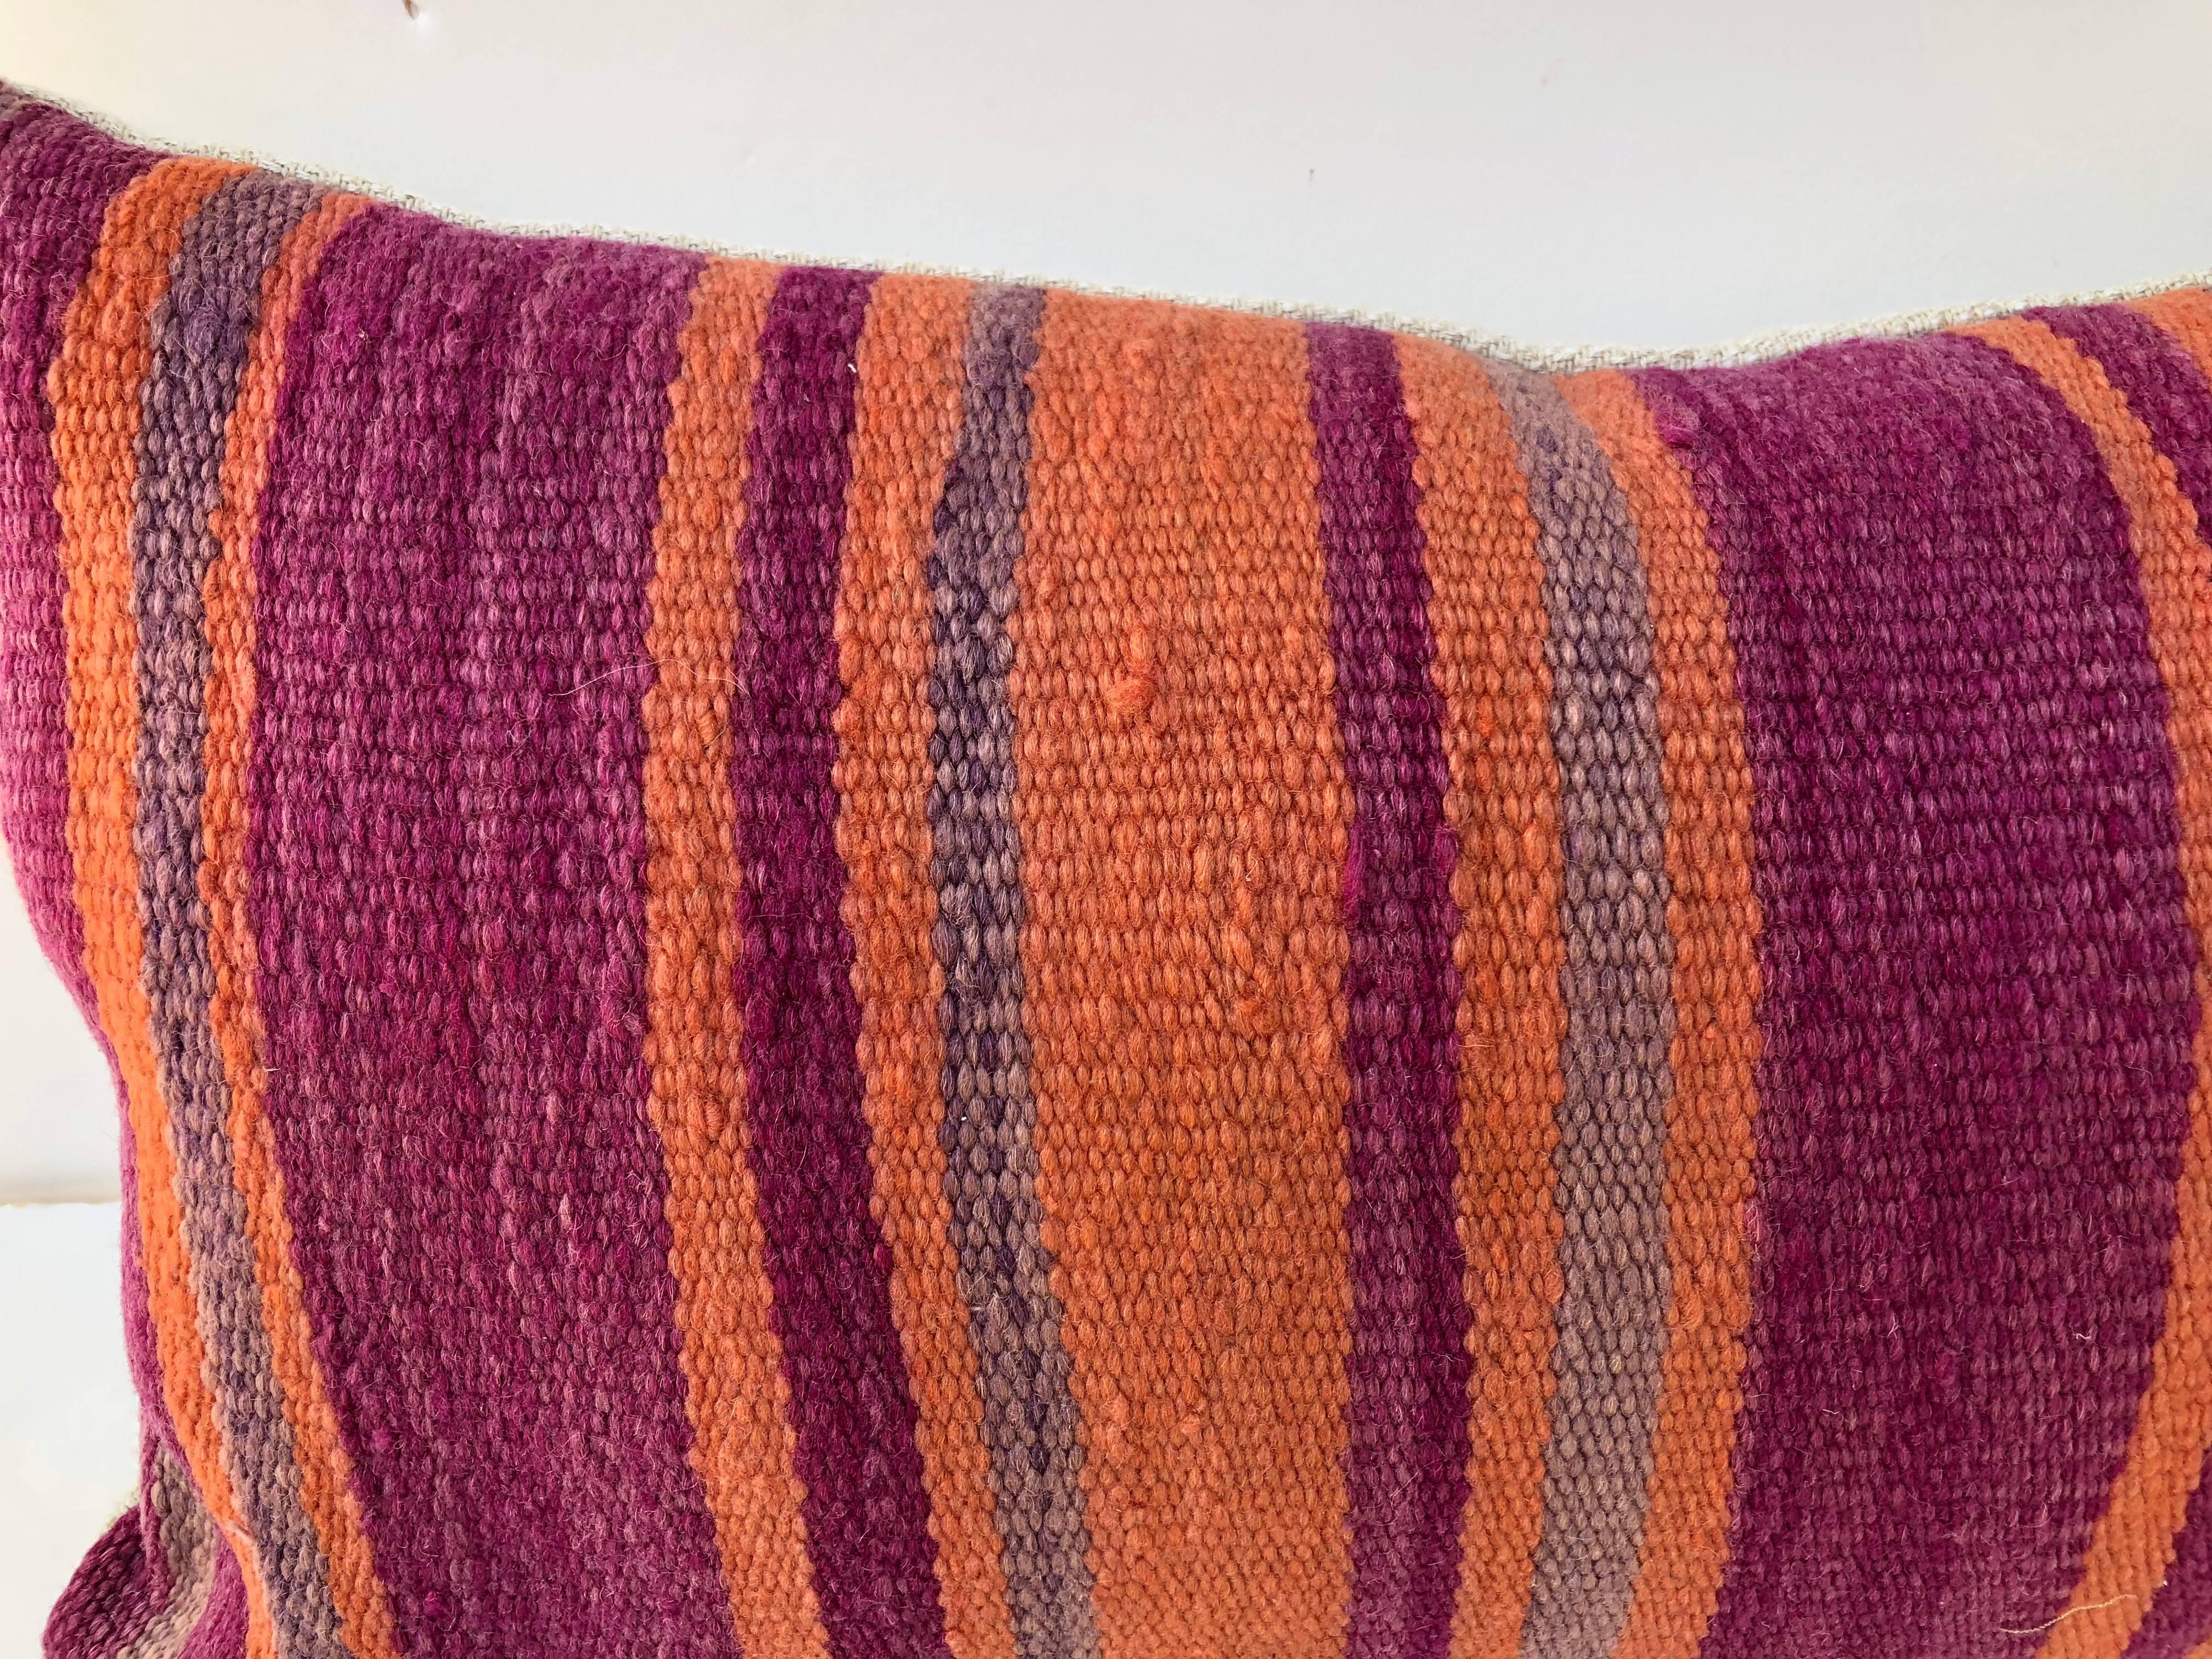 Custom pillow cut from a vintage Moroccan hand loomed wool Berber rug from the Atlas Mountains. Wool is soft and lustrous with colorful stripes. Pillow is backed in linen, filled with an insert of 50/50 down and feathers and hand sewn closed. We